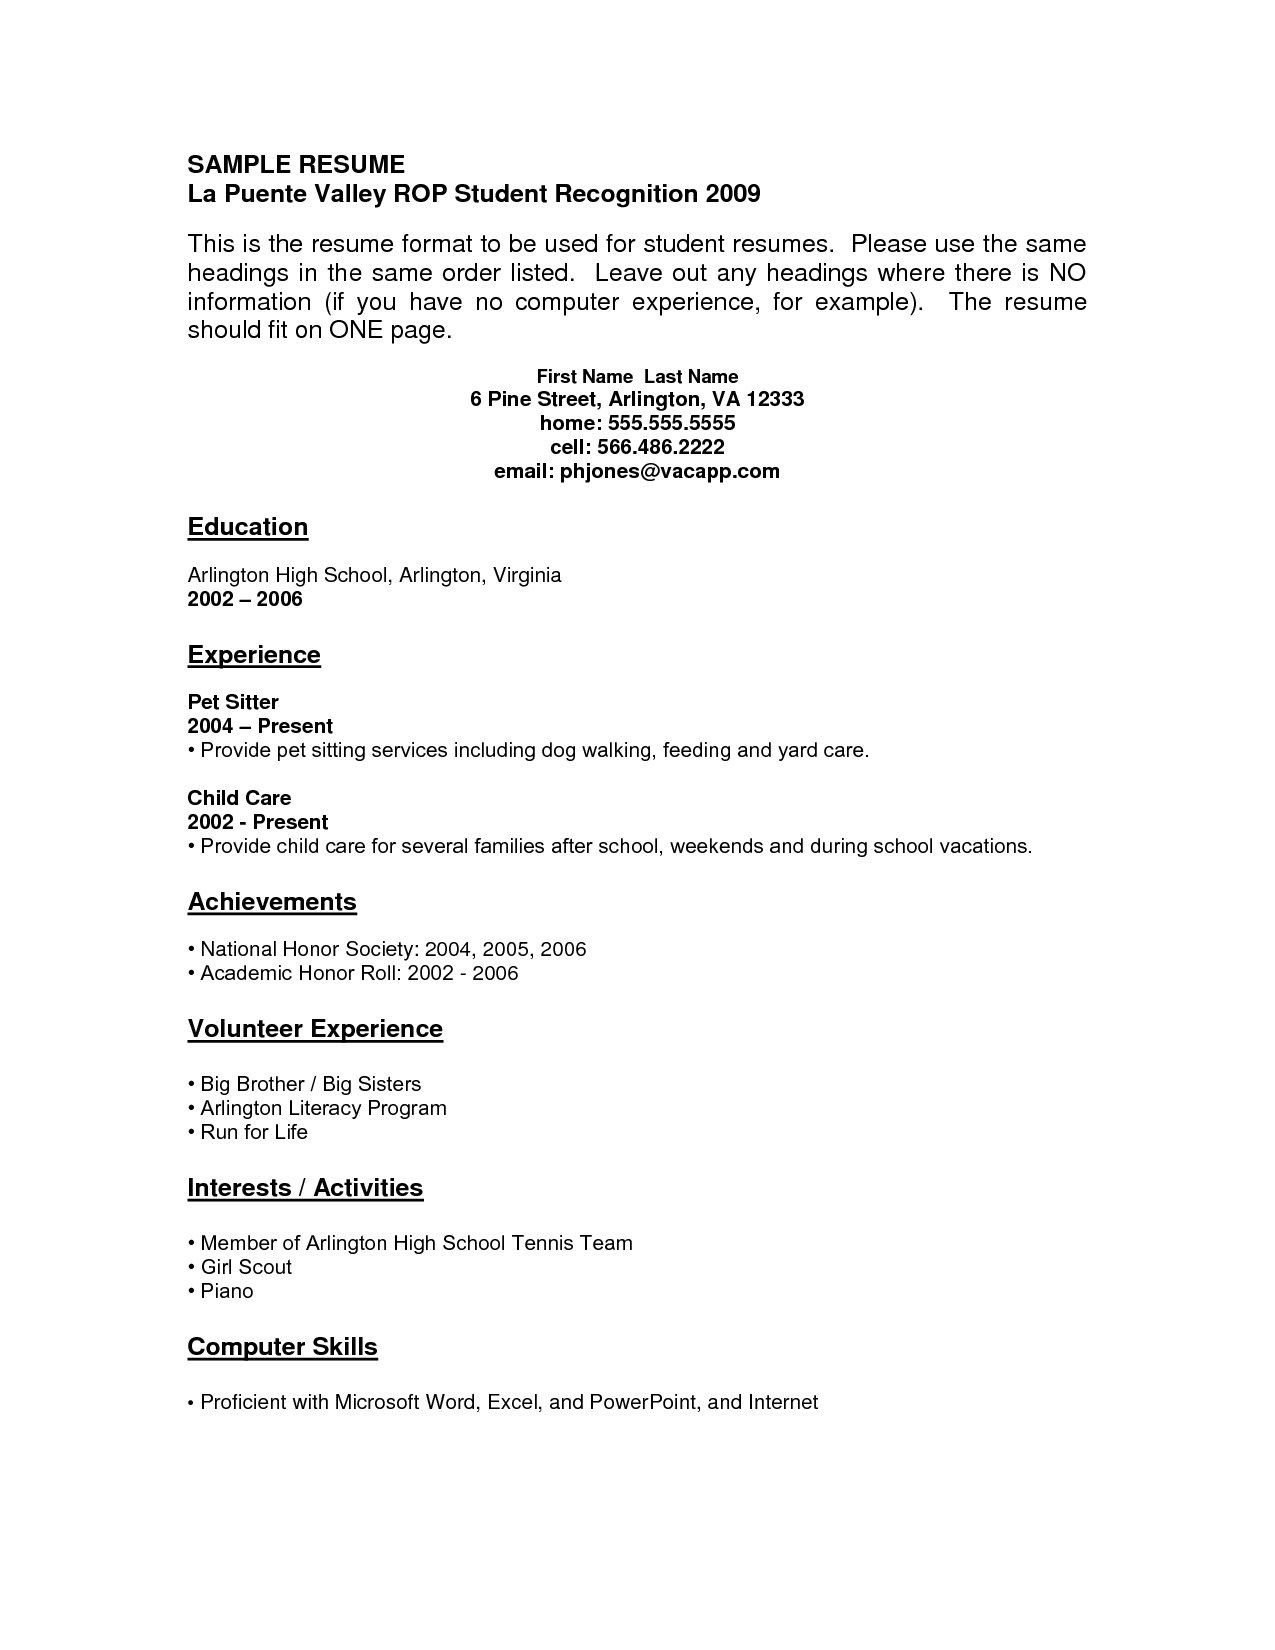 Sample Resume for A Person with No Experience Resume Examples with No Job Experience – Resume Templates …